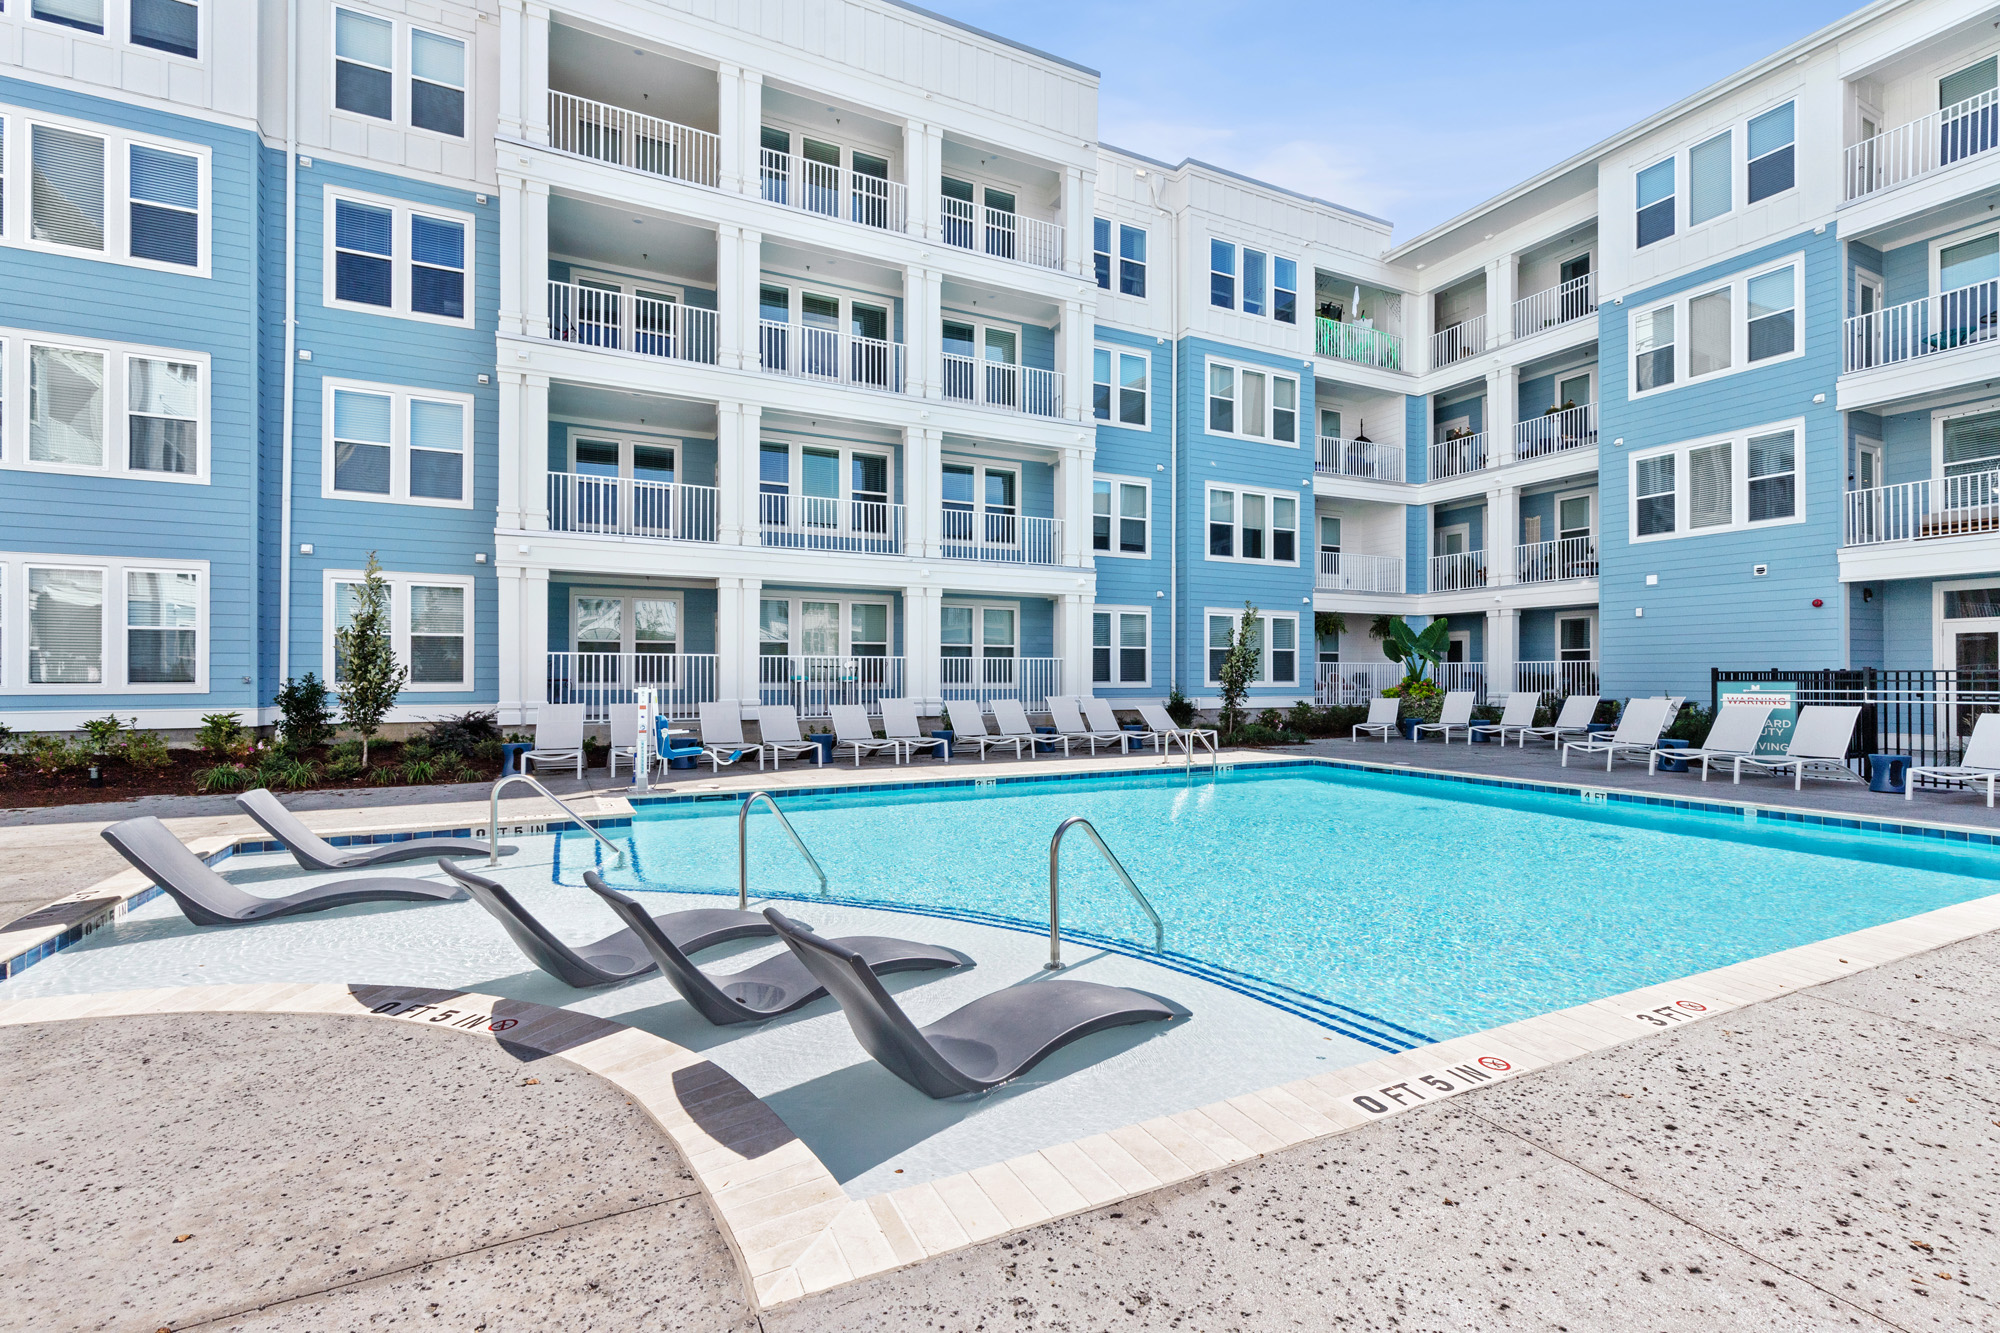 Oasis at Riverlights - Amenities